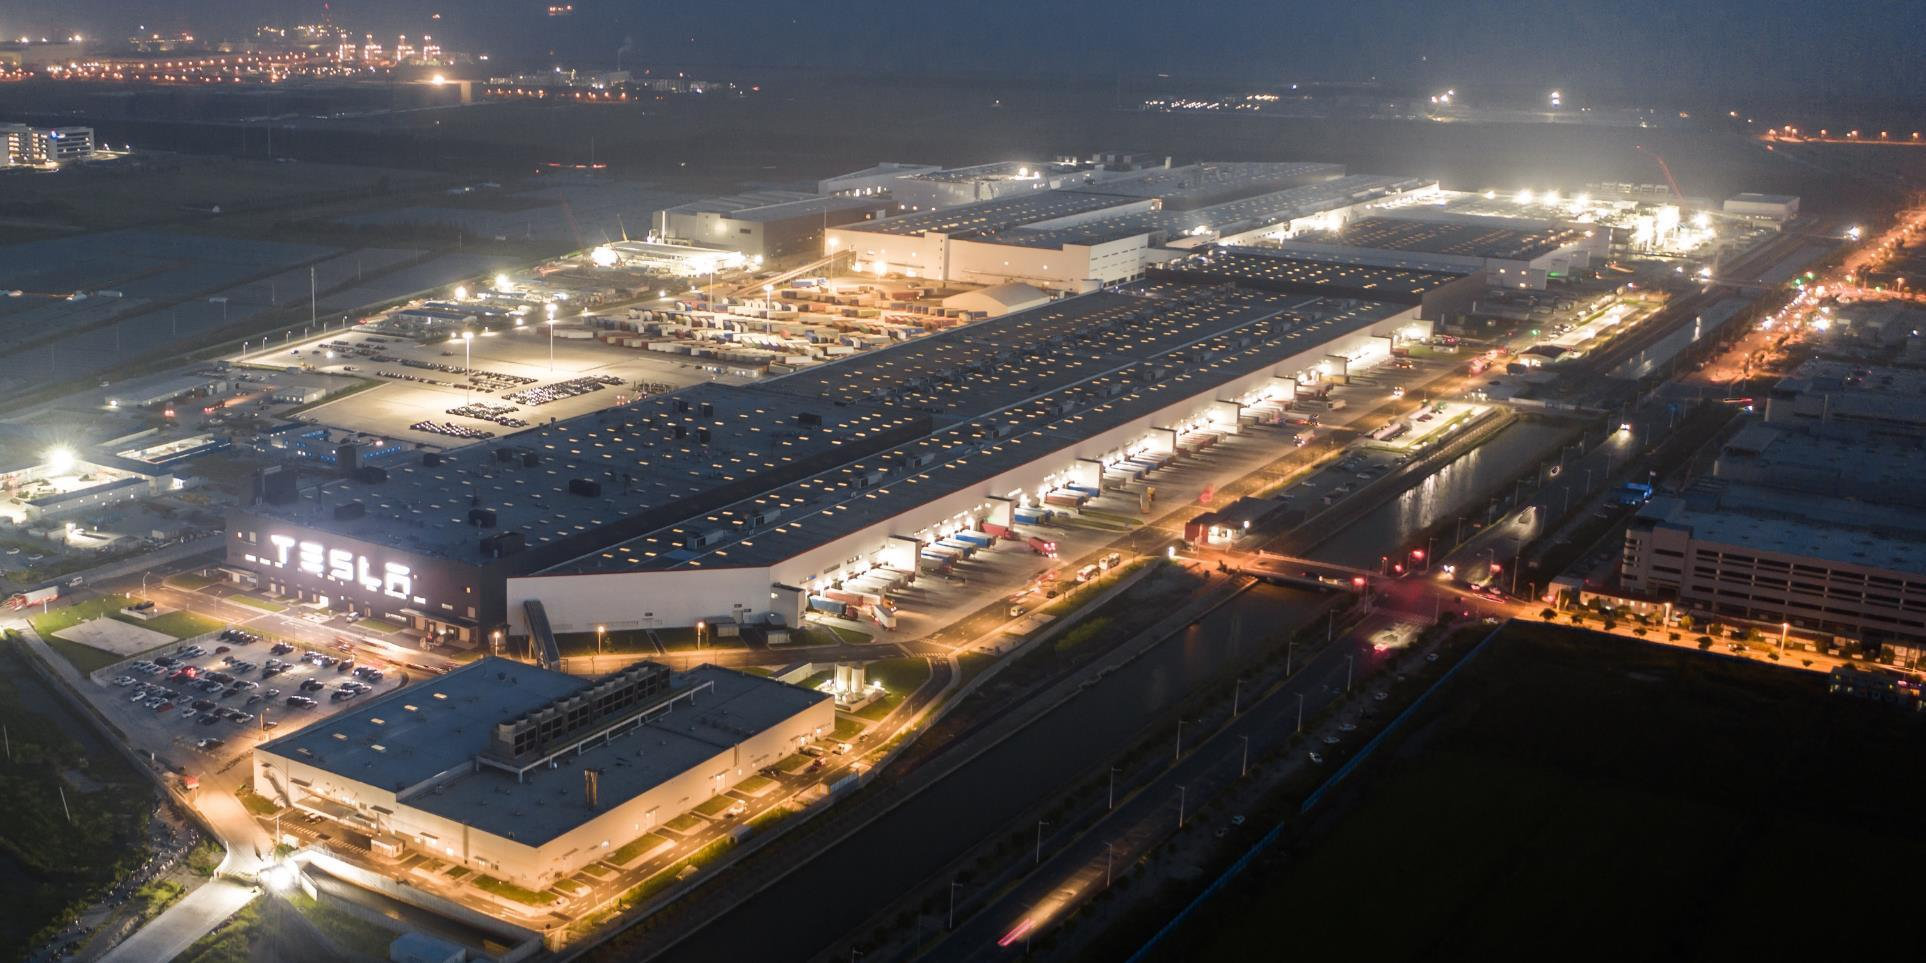 Investing 1.2 billion and taking 5 months, Tesla's Shanghai factory expands production again.